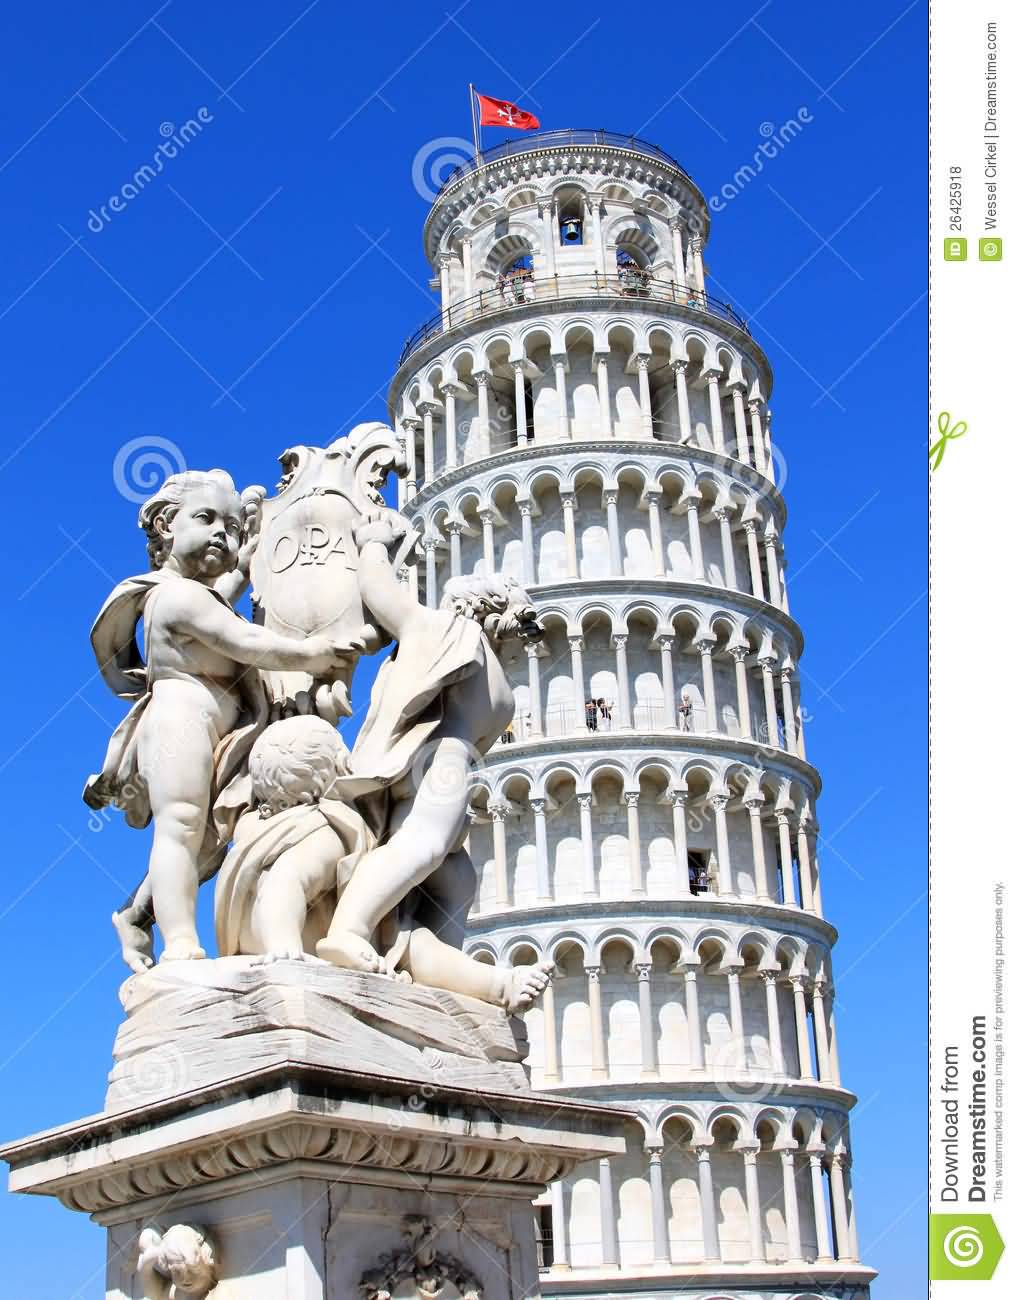 Statues Of Three Angels In Front Of Leaning Tower Of Pisa